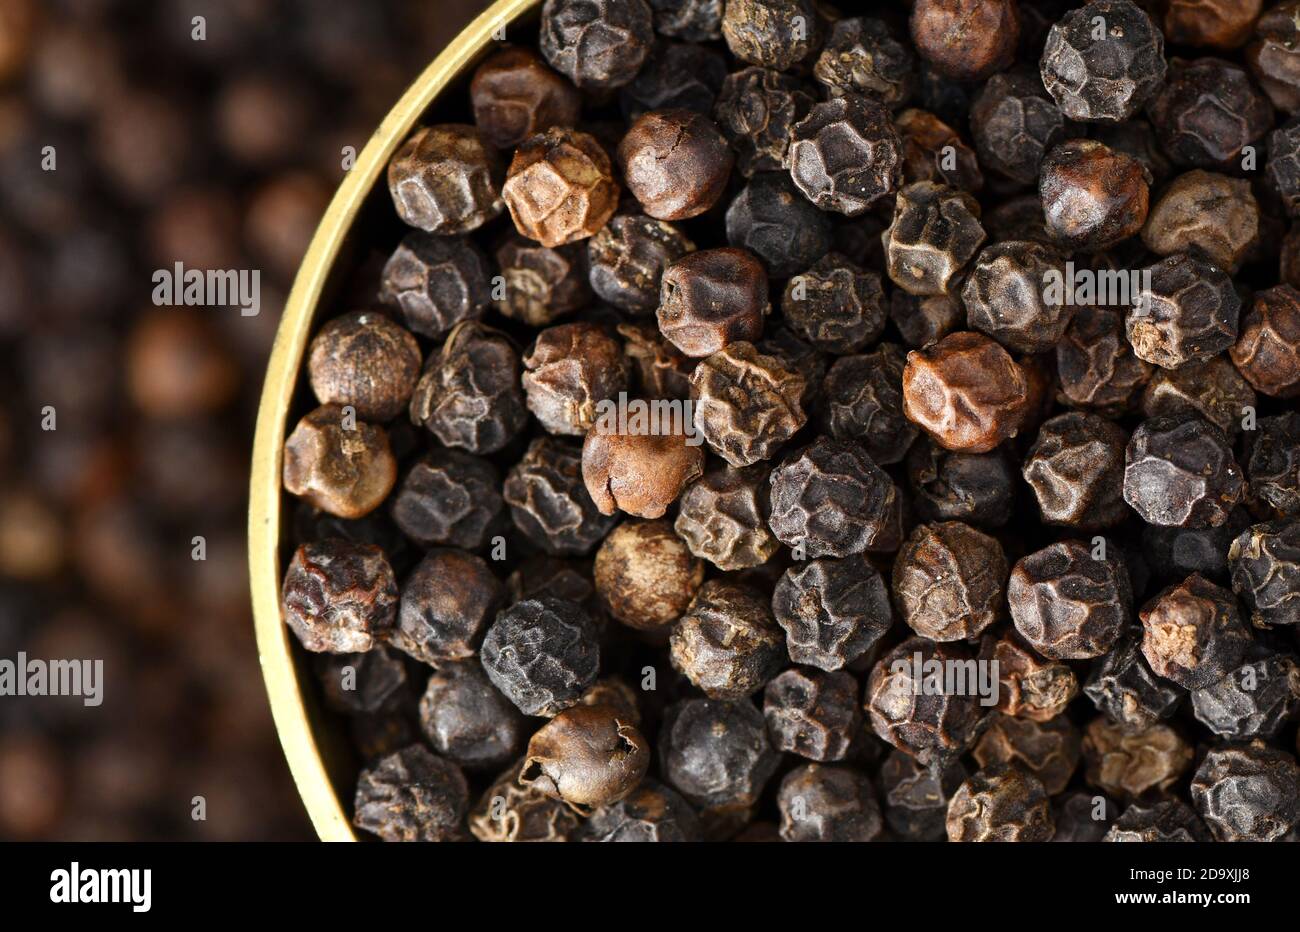 Close up one bowl full of black pepper peppercorns. Black pepper “king of spices”  is one of the most commonly used spices worldwide. black gold Stock Photo